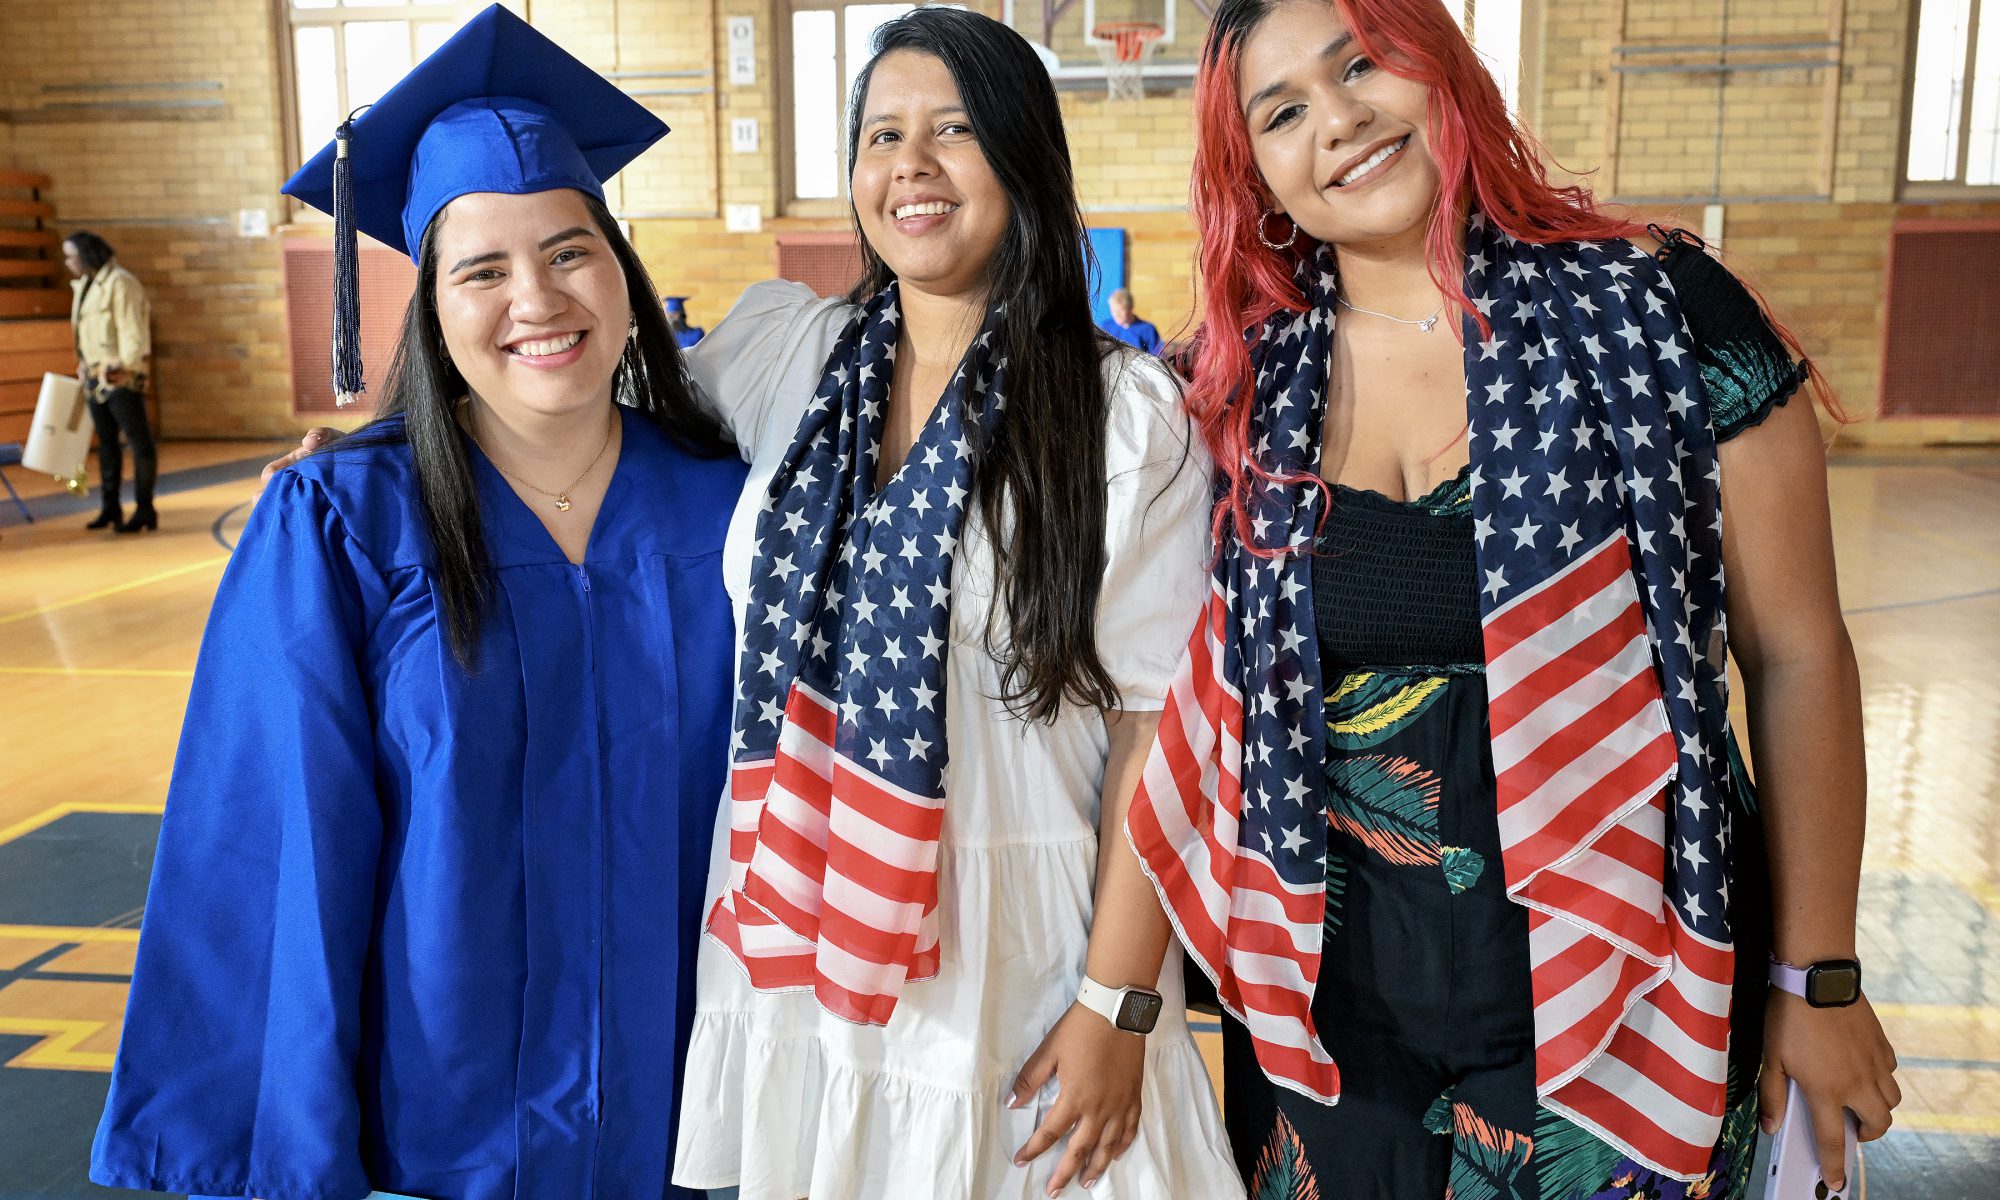 Three woman stand together to pose for a picture. One on the far right is dressed in a graduates cap and gown. The other two each ware scarves depicting the American flag.